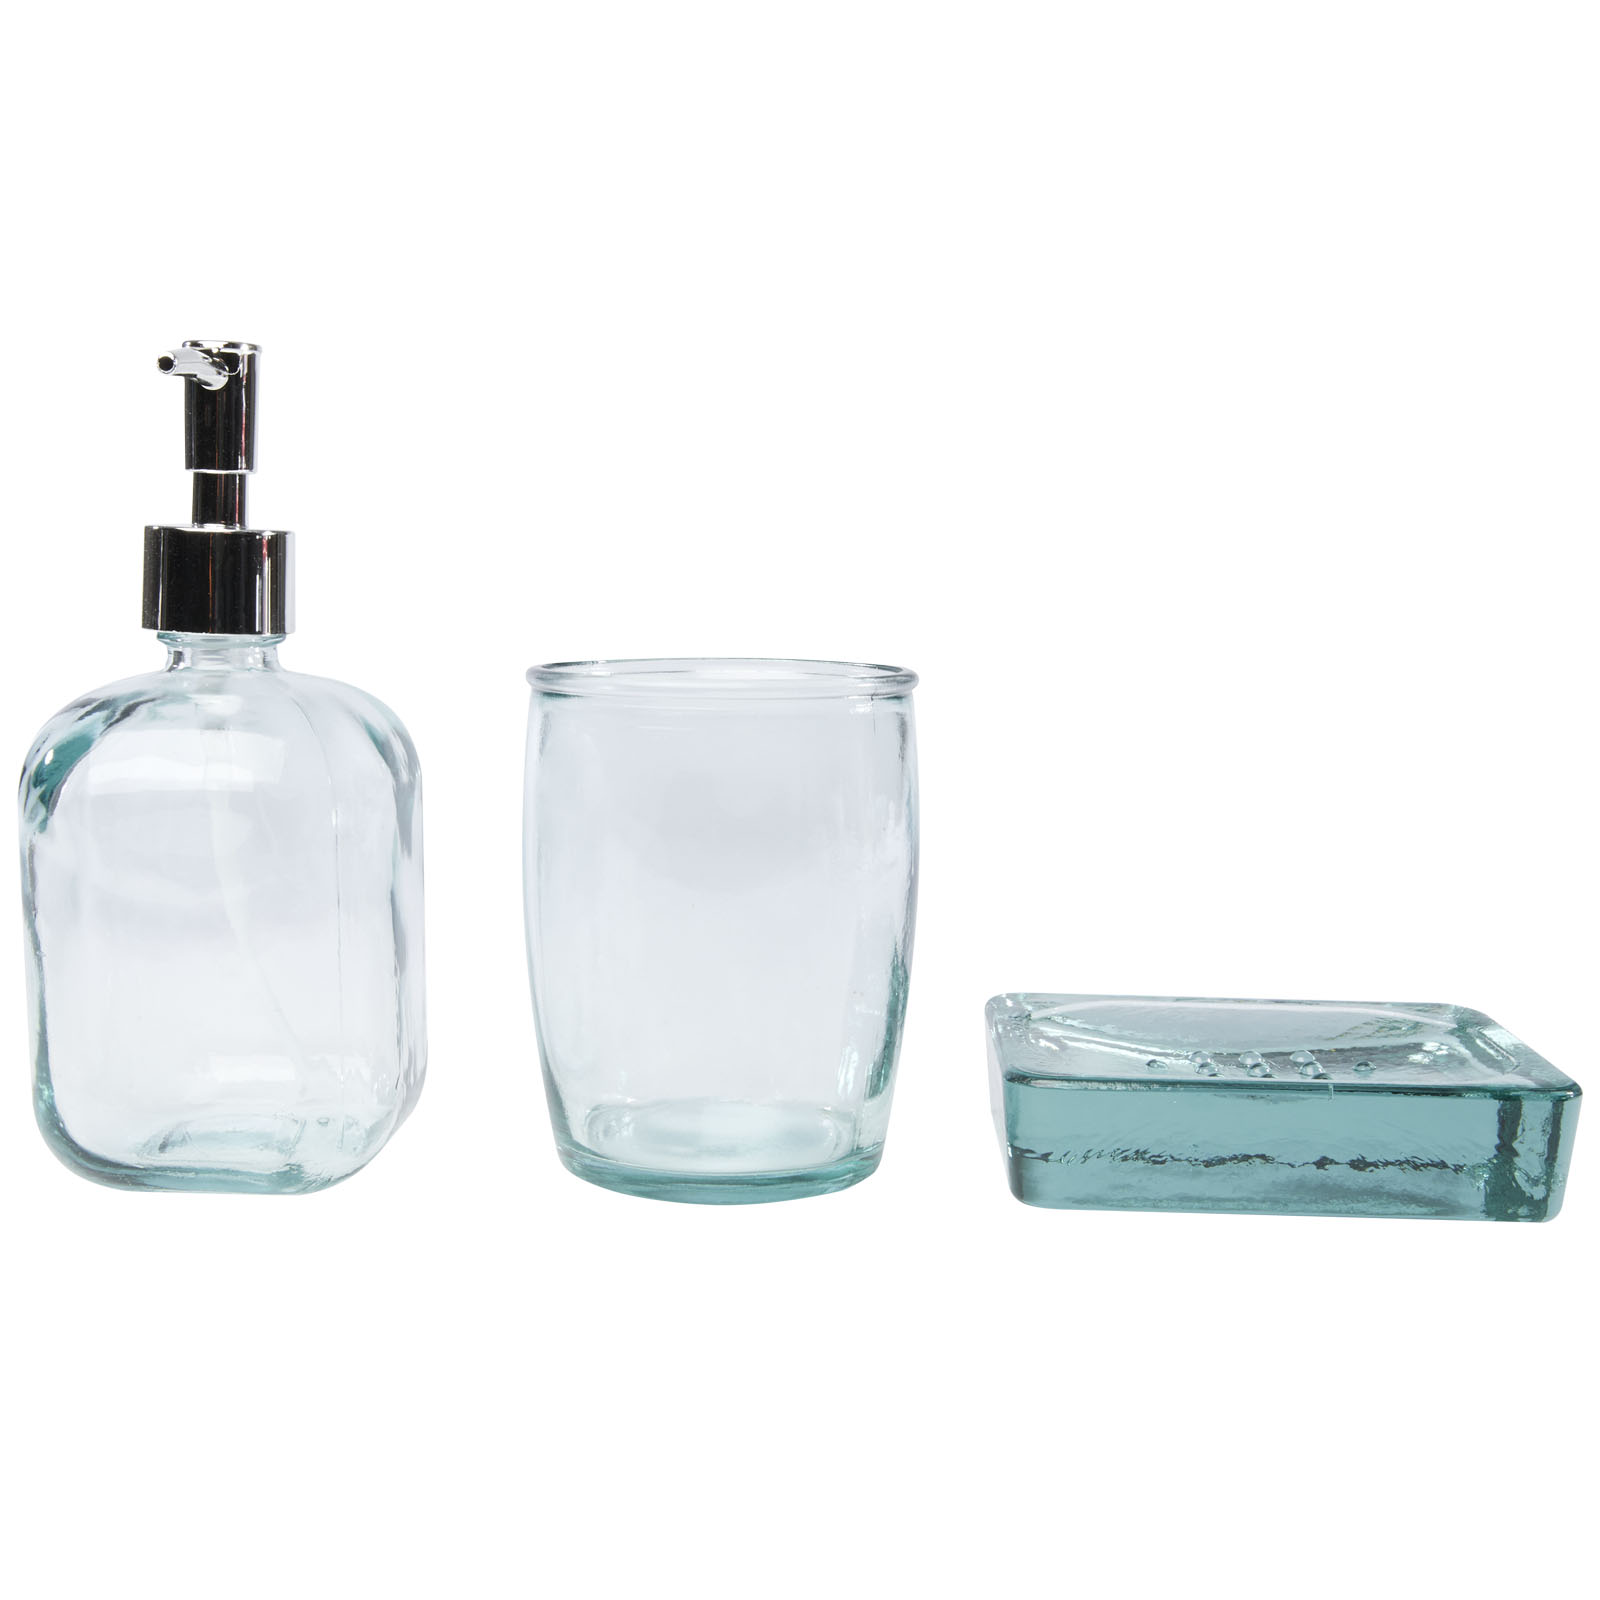 Advertising Home Accessories - Jabony 3-piece recycled glass bathroom set - 2